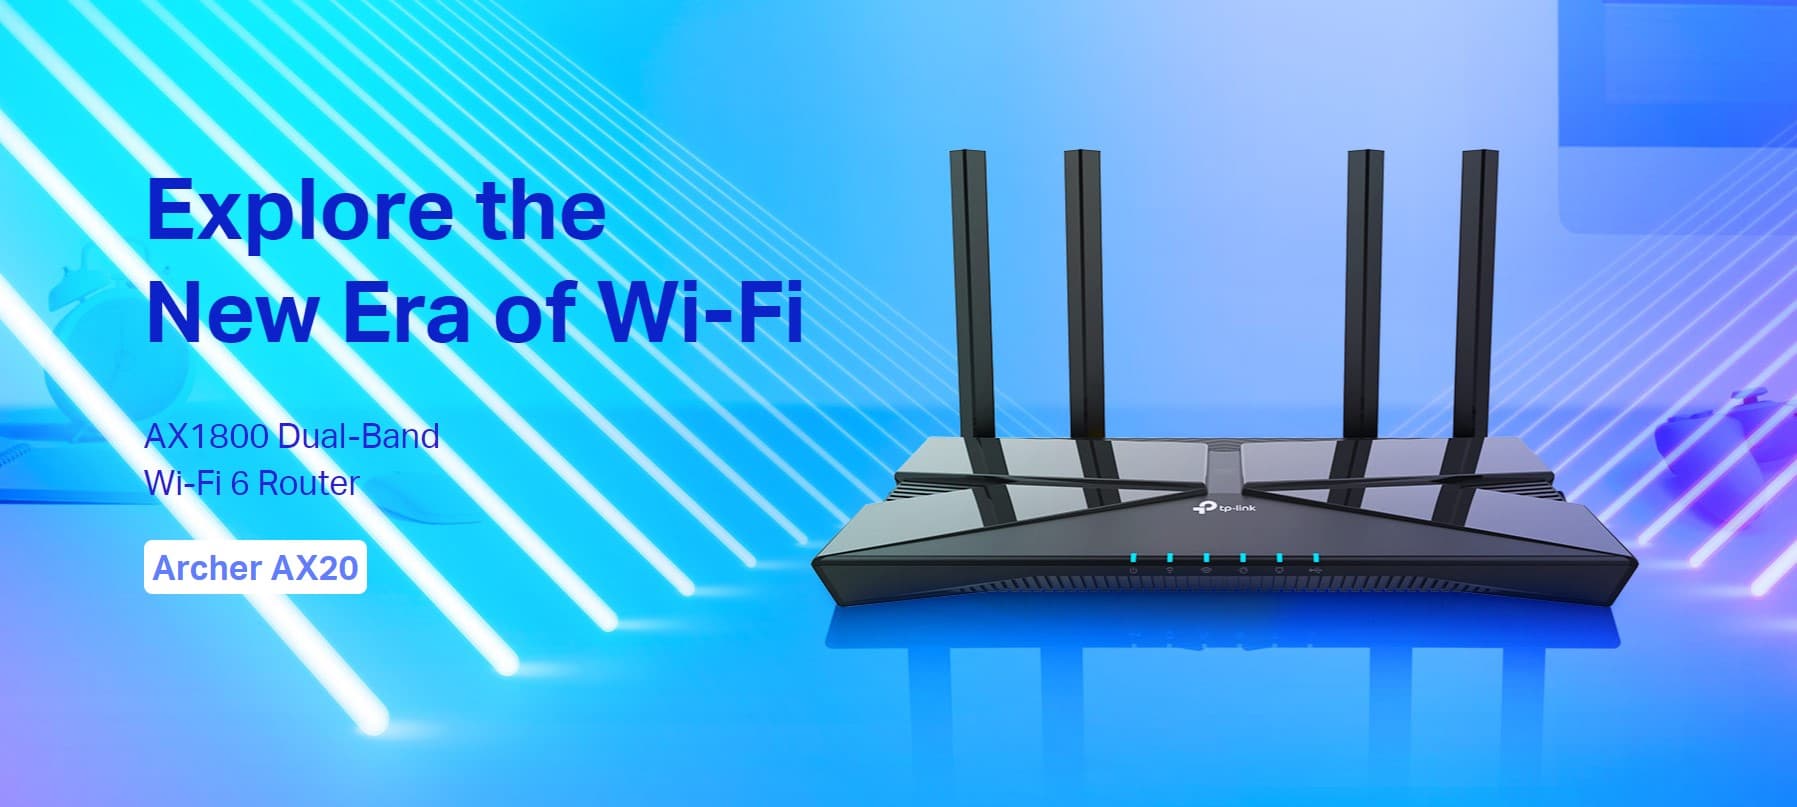 TP Link Archer AX20 AX1800 Wi-Fi 6 Router